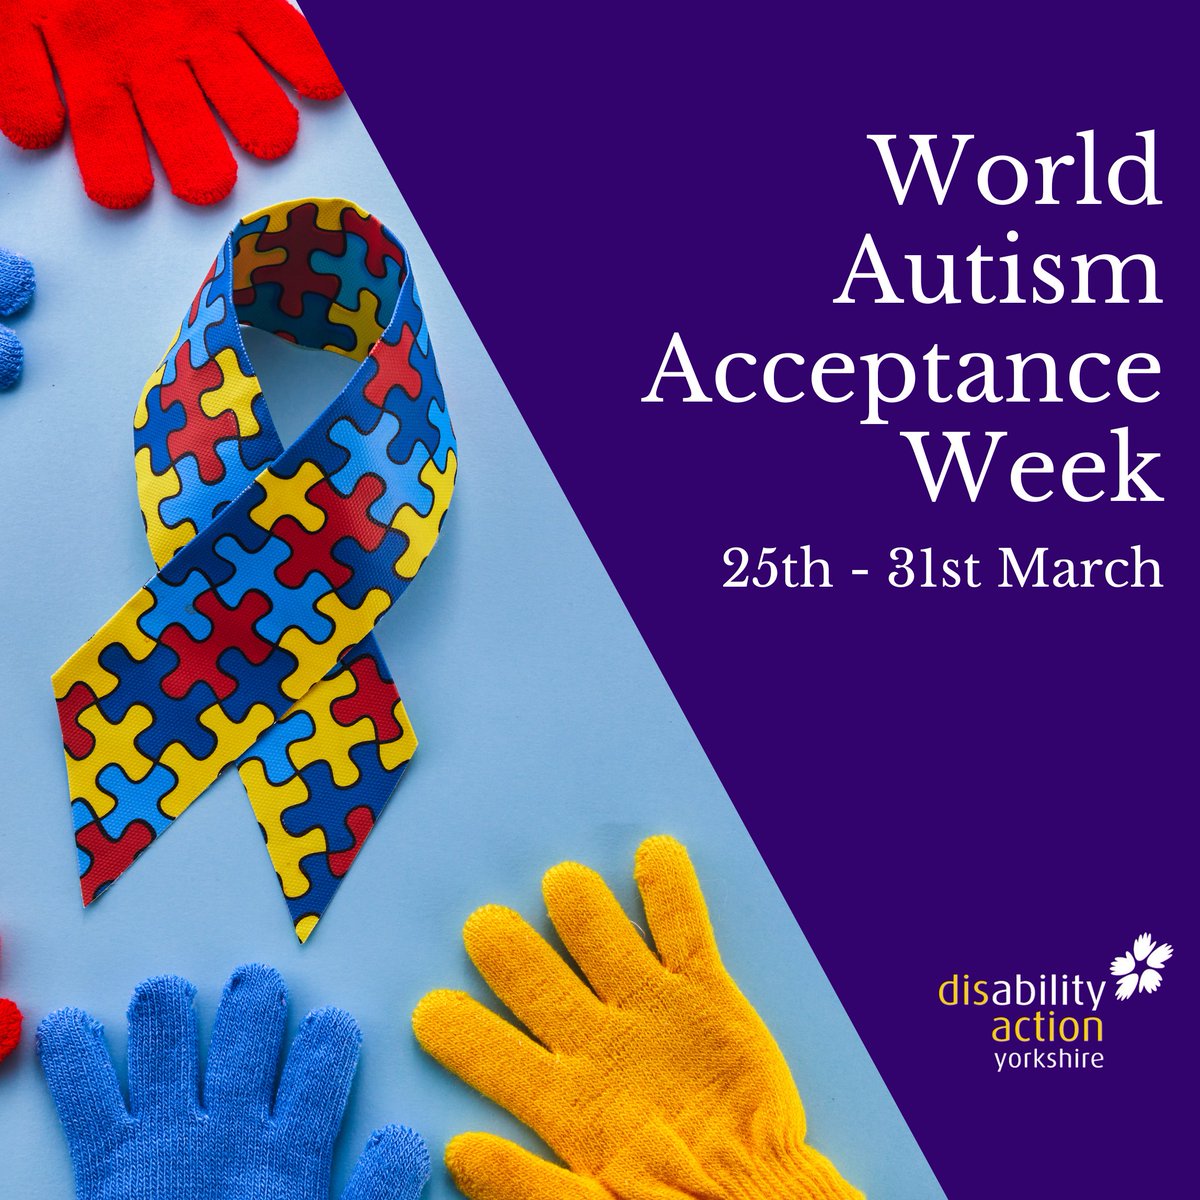 This week, from March 25th - 31st, we are celebrating World Autism Acceptance Week! Together, we can build a world where everyone feels valued, respected, and empowered to thrive! #WorldAutismAcceptanceWeek #Autism #DisabilityActionYorkshire #DAY #Equality